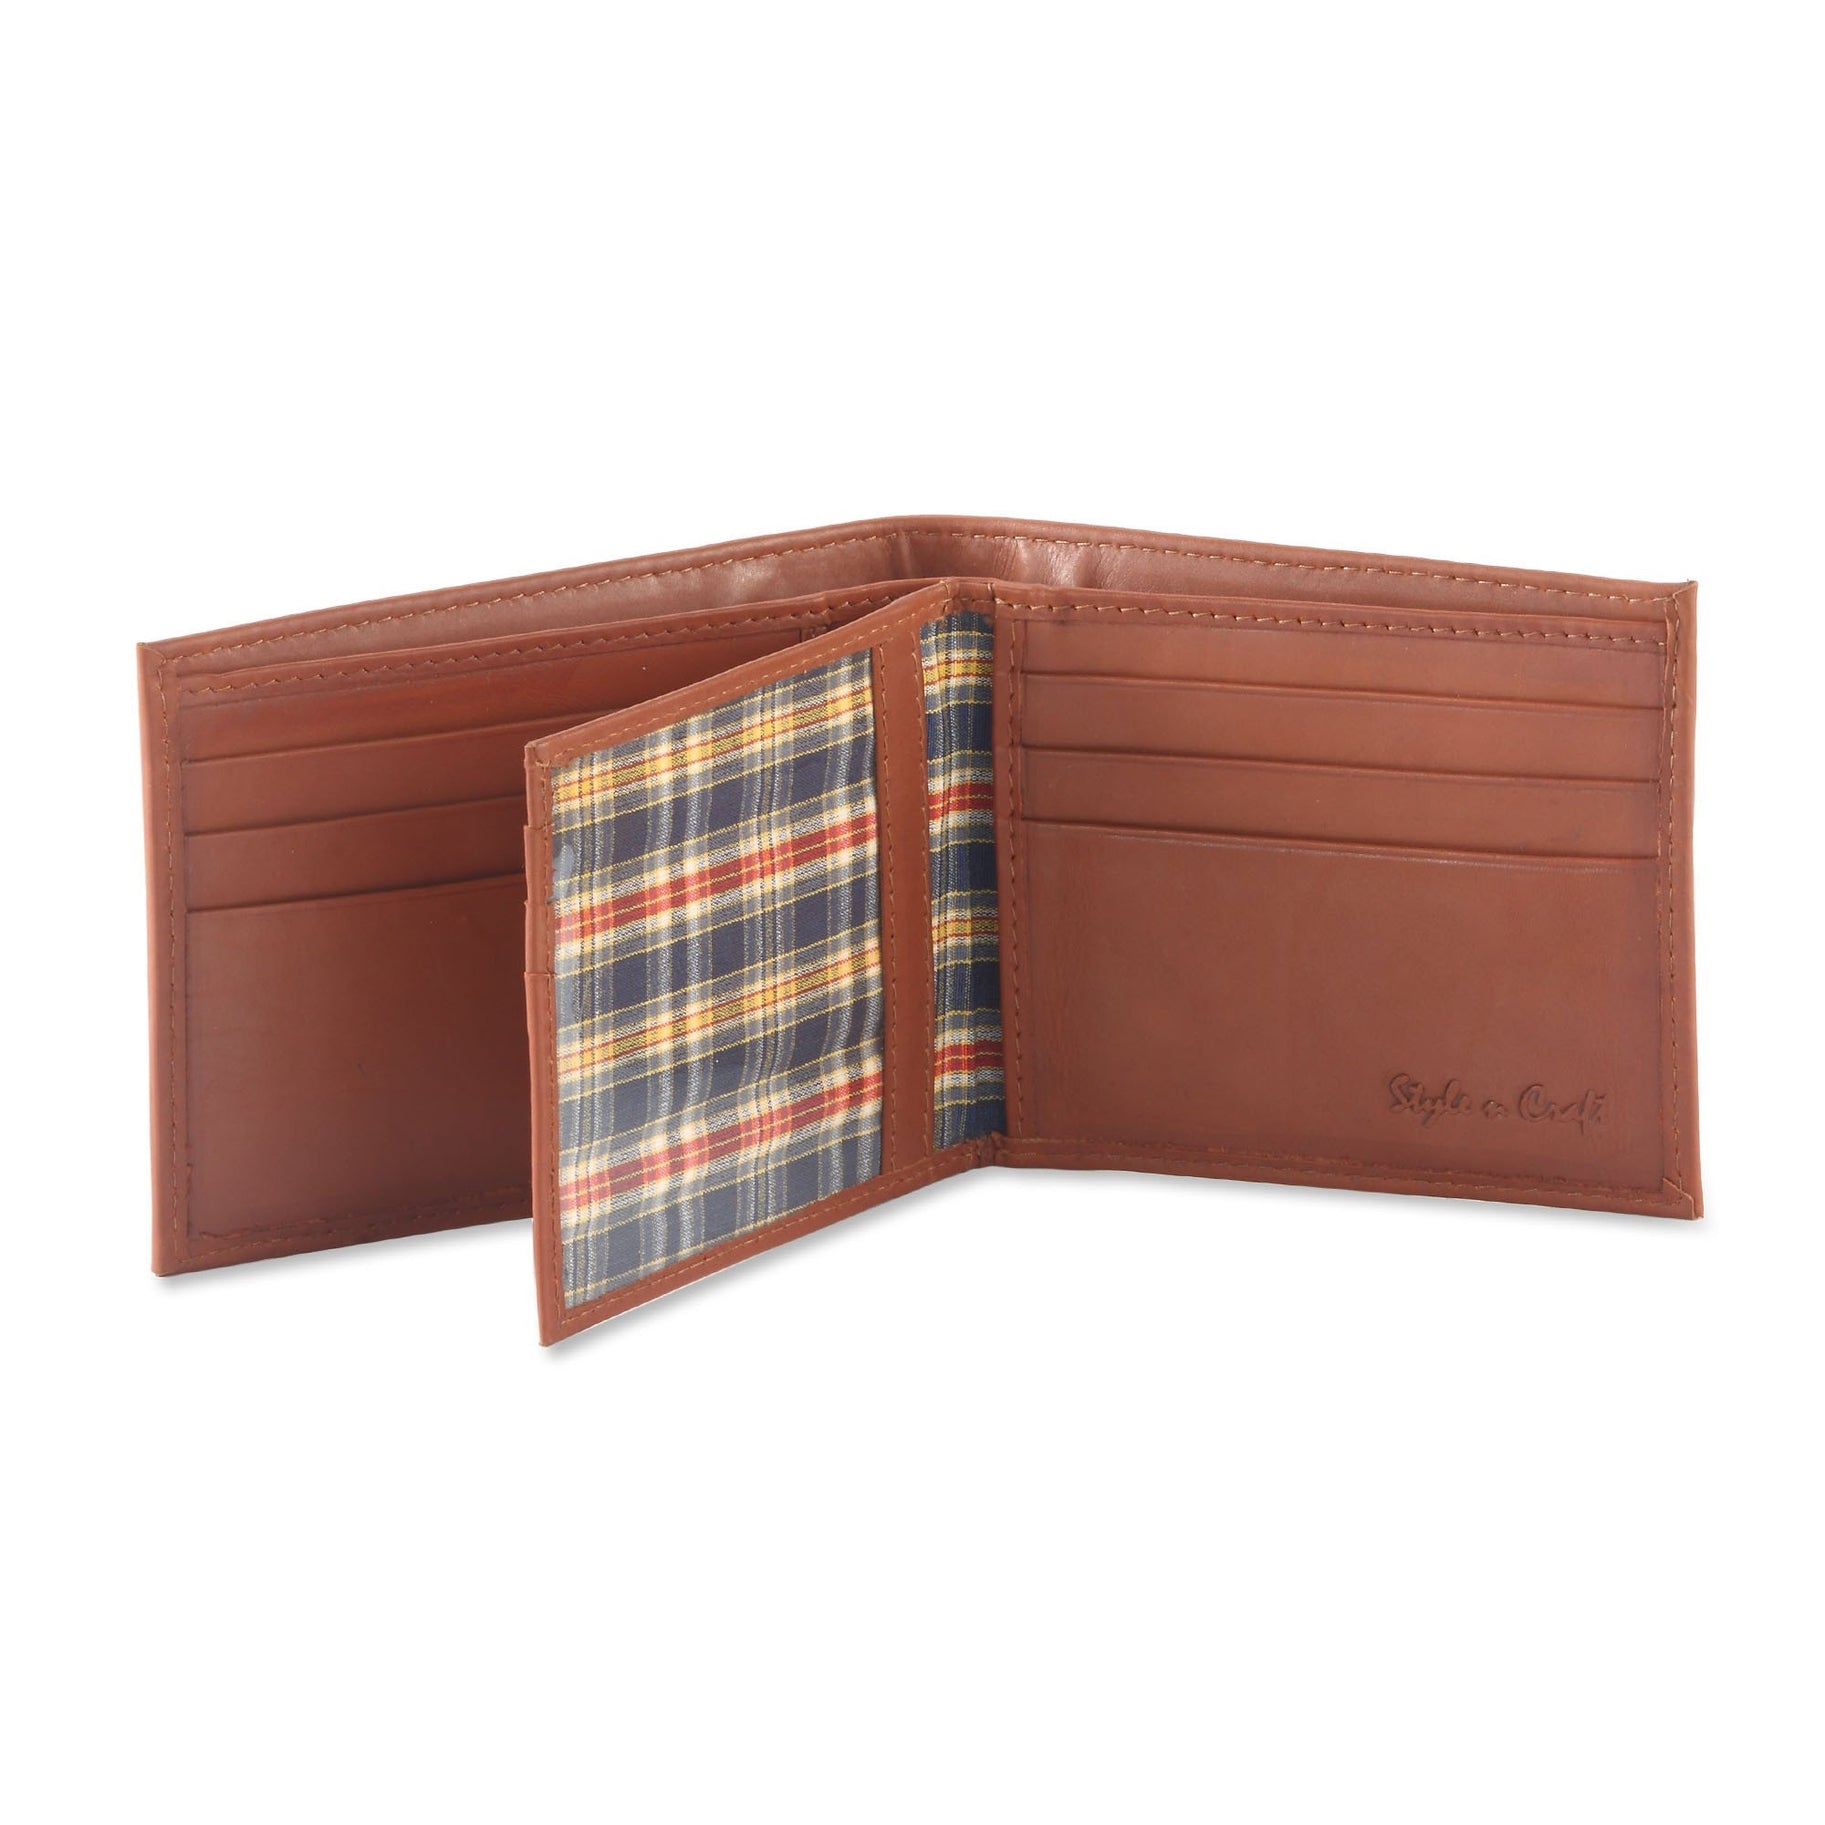 Bifold Leather Wallet with Center Flap in Tan